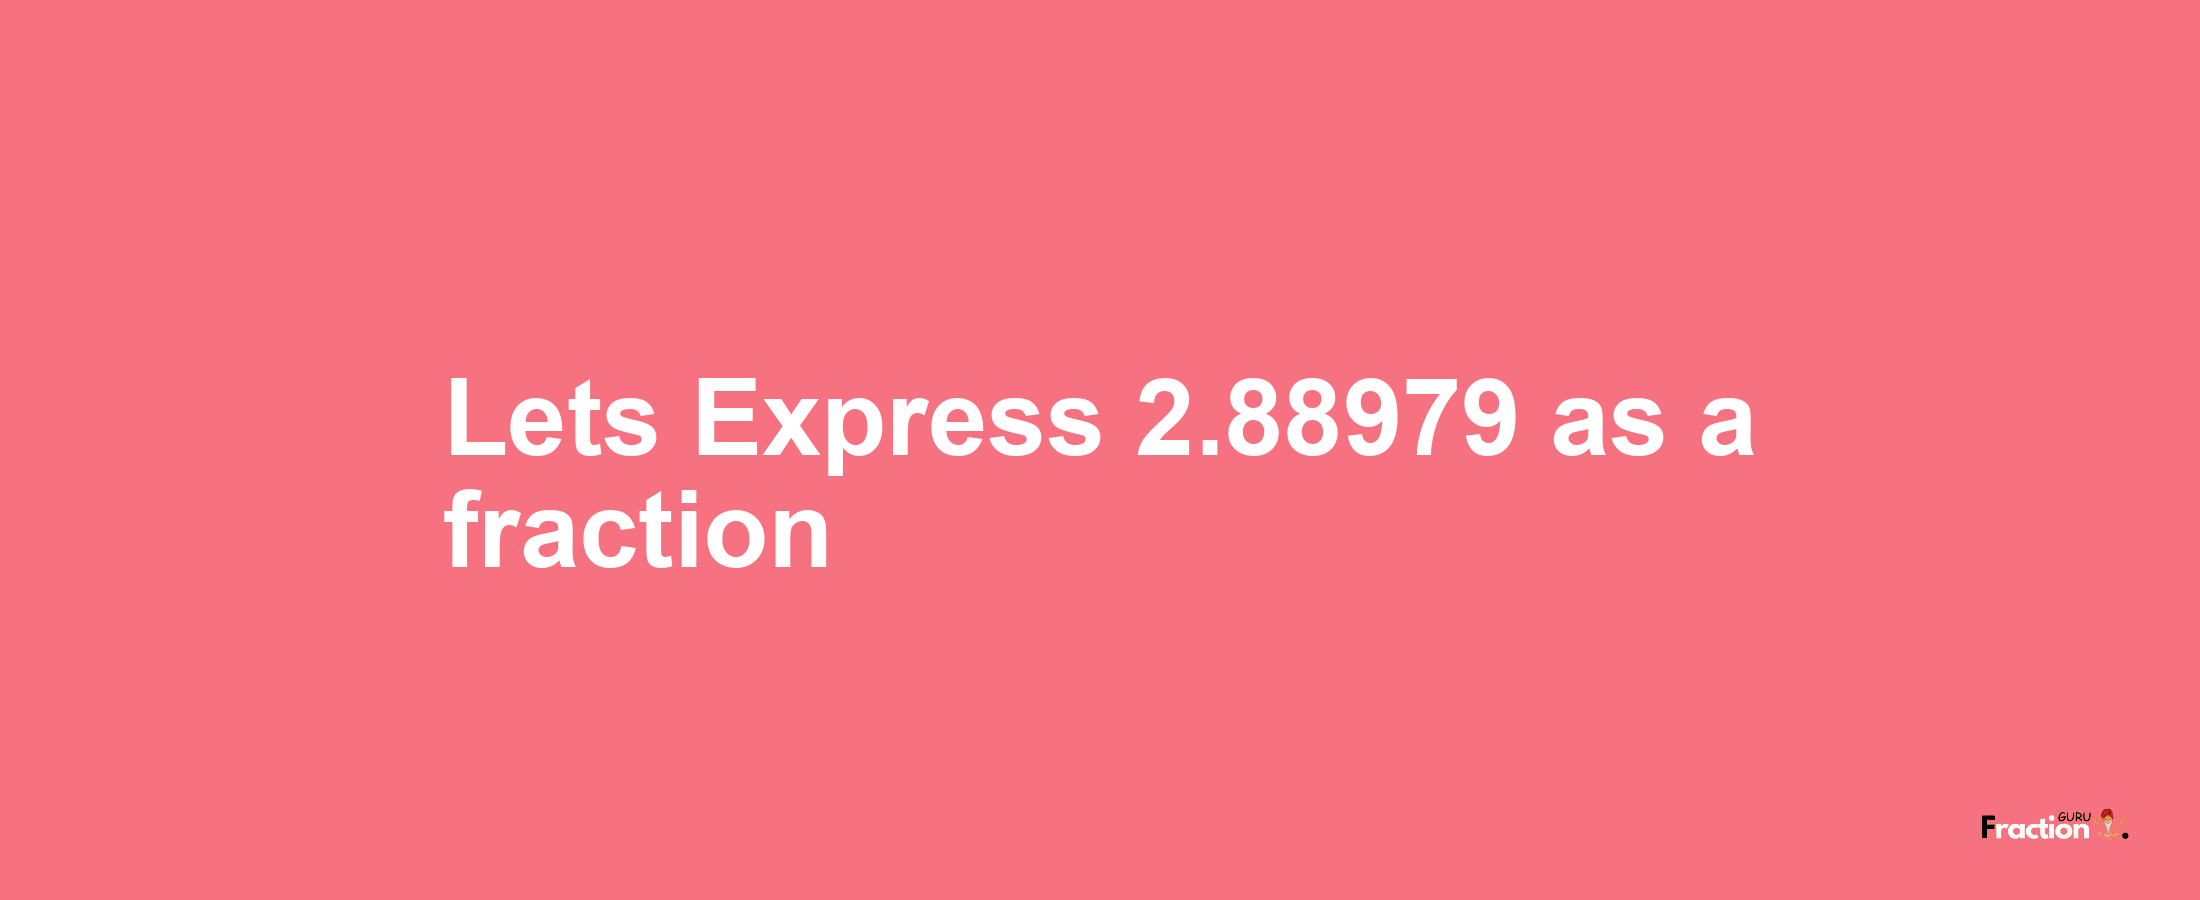 Lets Express 2.88979 as afraction